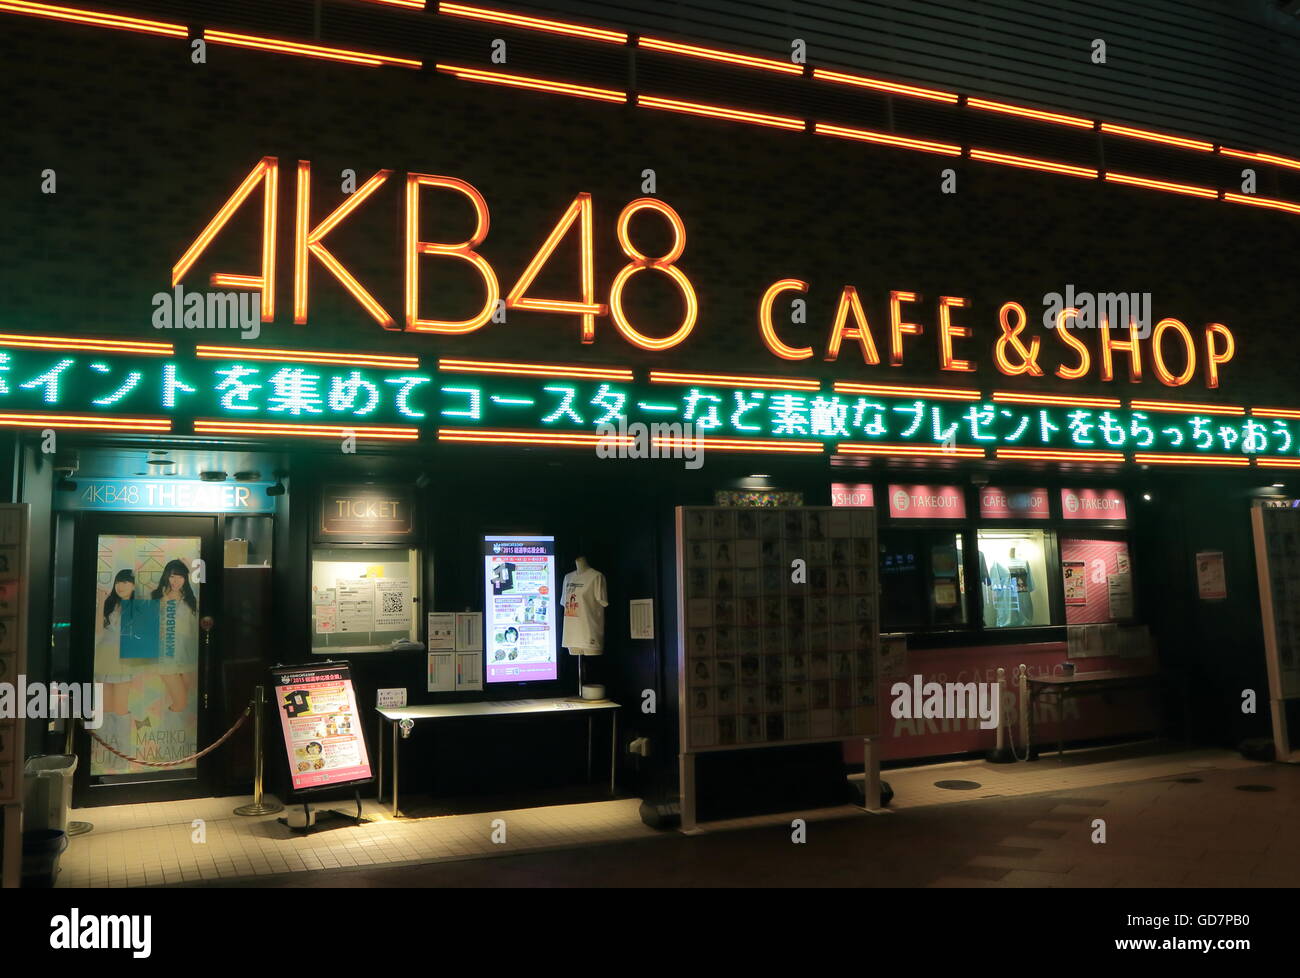 AKB 48 cafe in Akihabara night in Tokyo Japan. AKB48 is a Japanese idol group, initially named after the Akihabara area Tokyo. Stock Photo